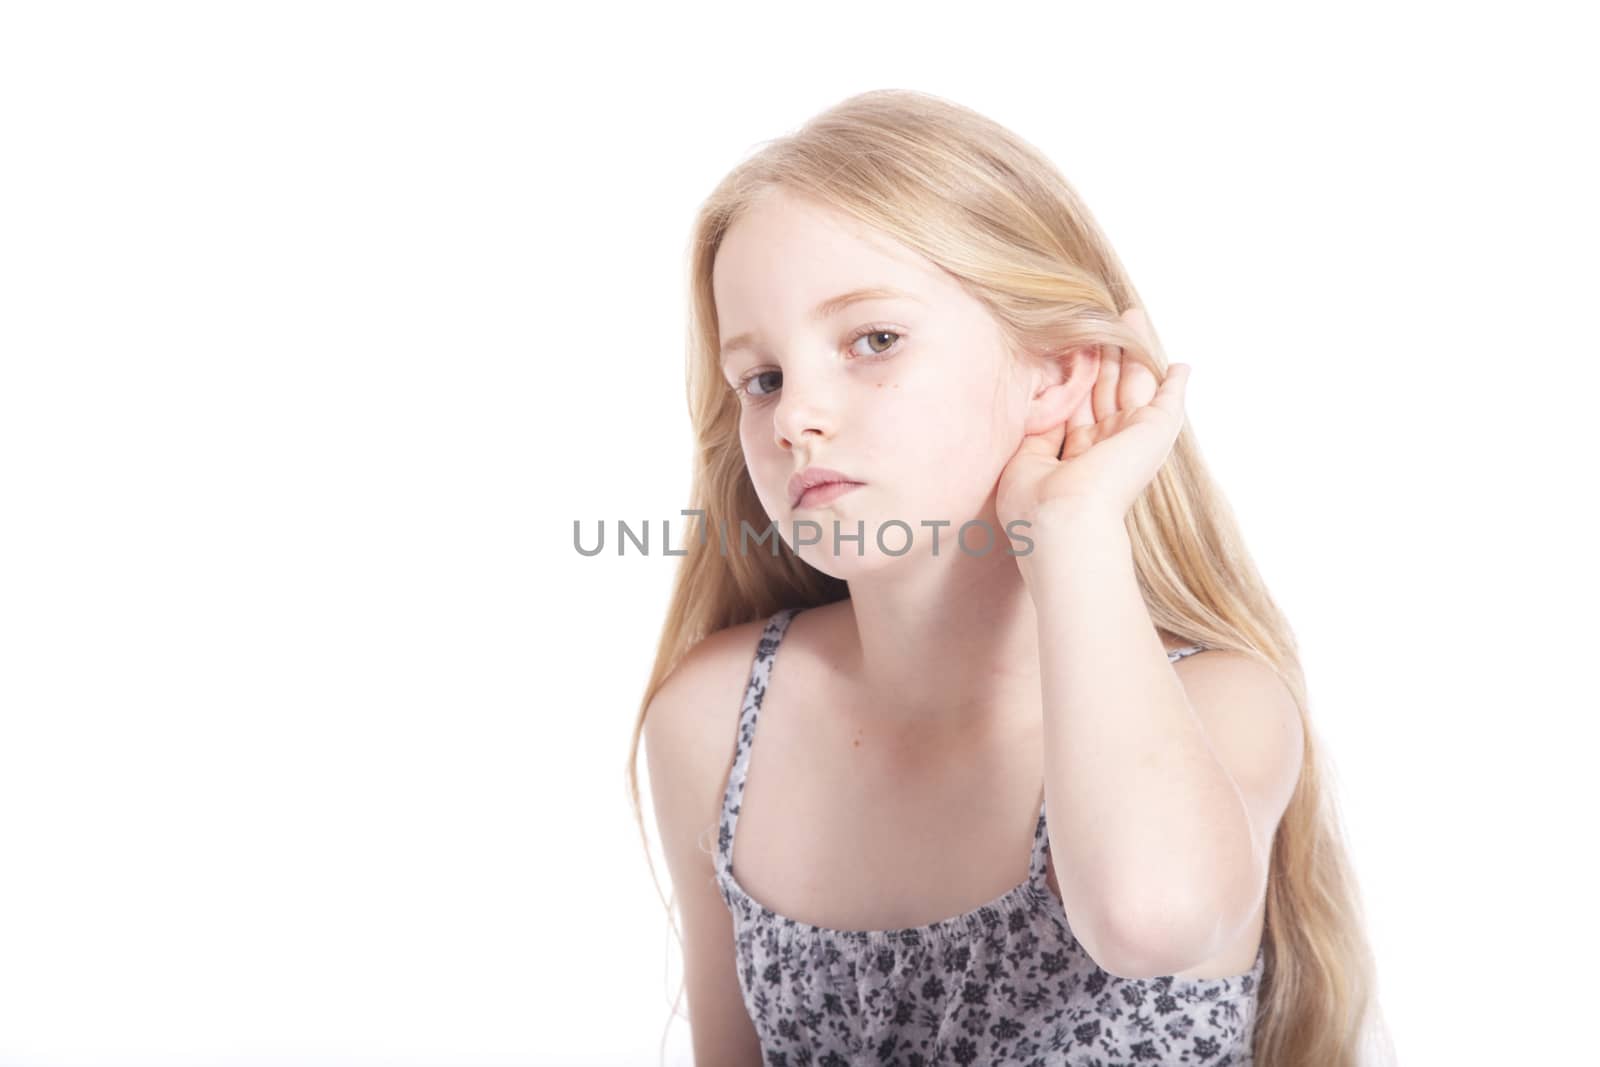 young girl making hearing gesture in studio against white background